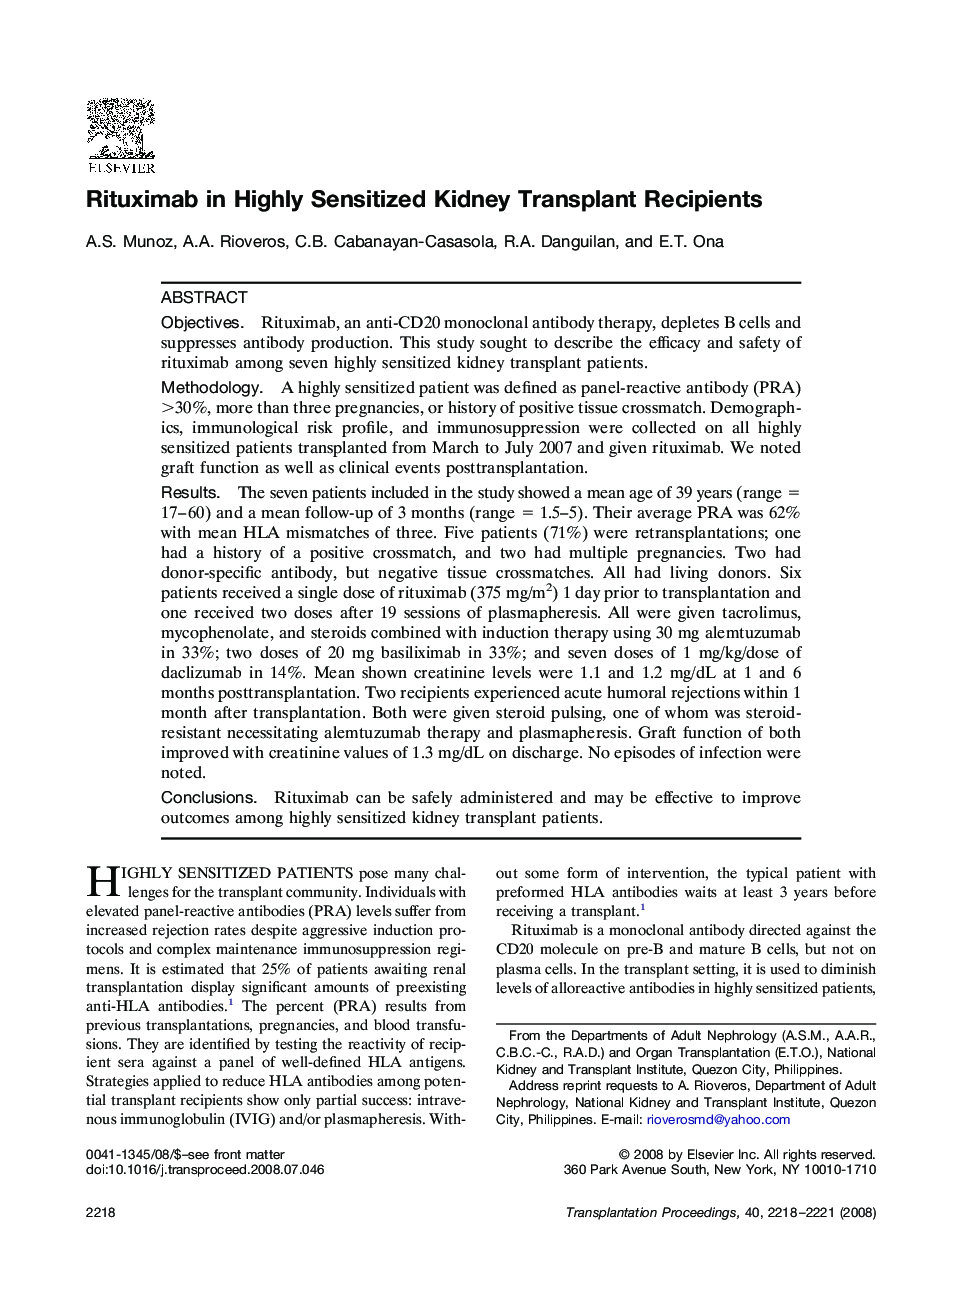 Rituximab in Highly Sensitized Kidney Transplant Recipients